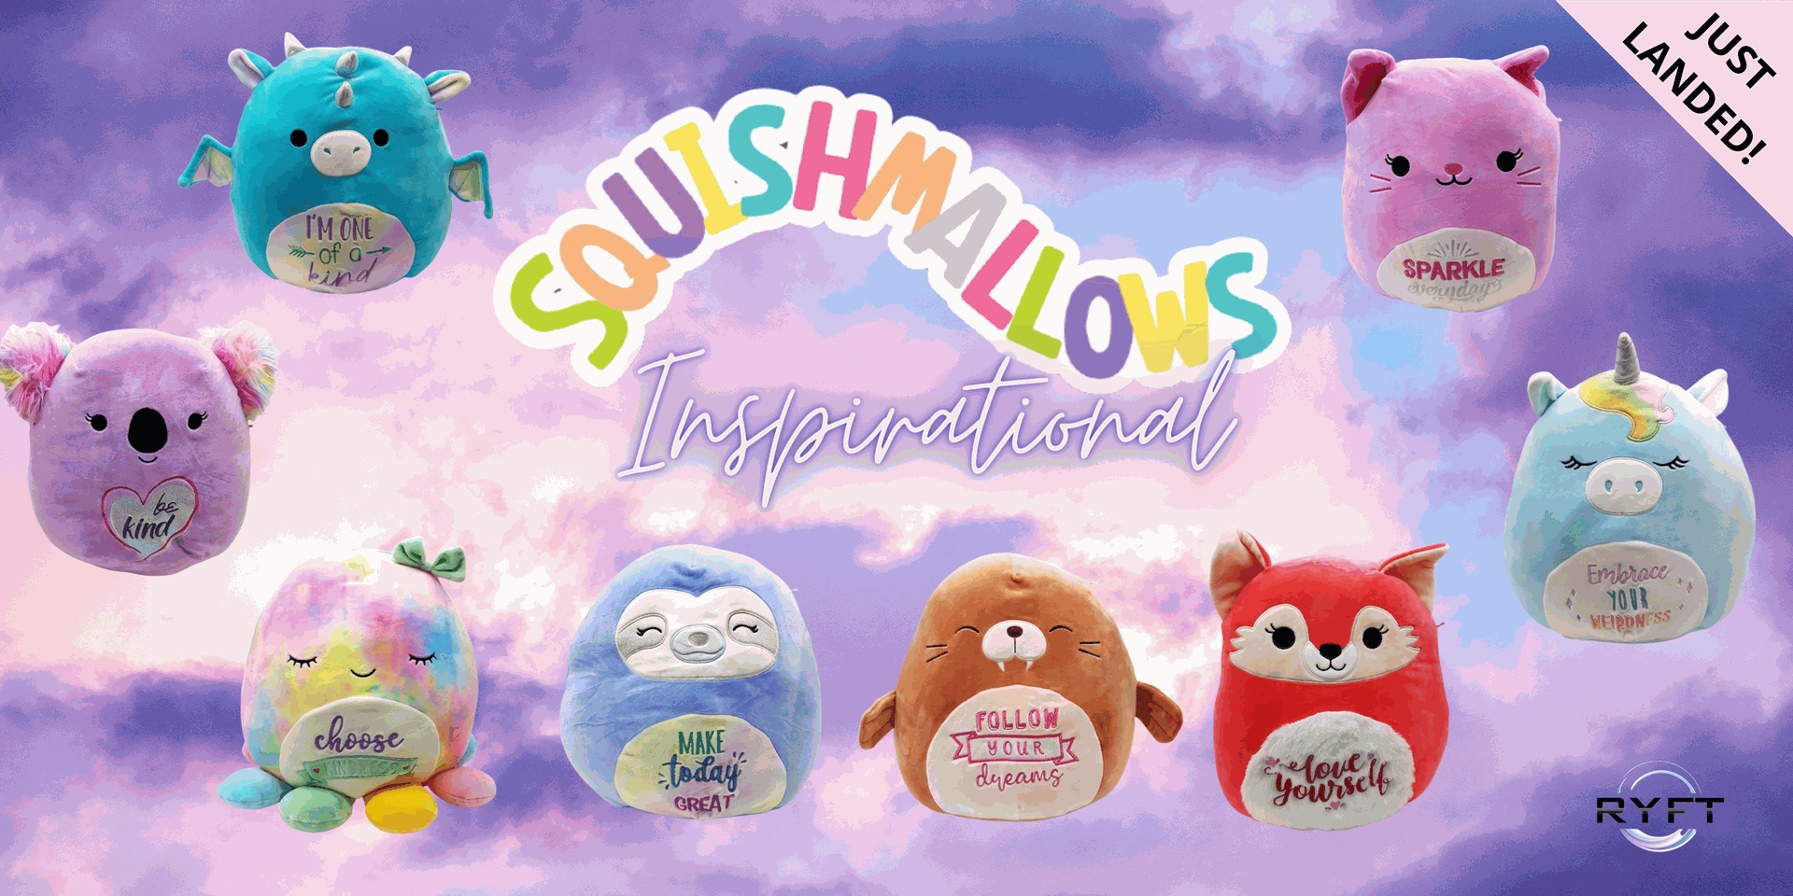 Squishmallow Inspirational Messages banner Ryft